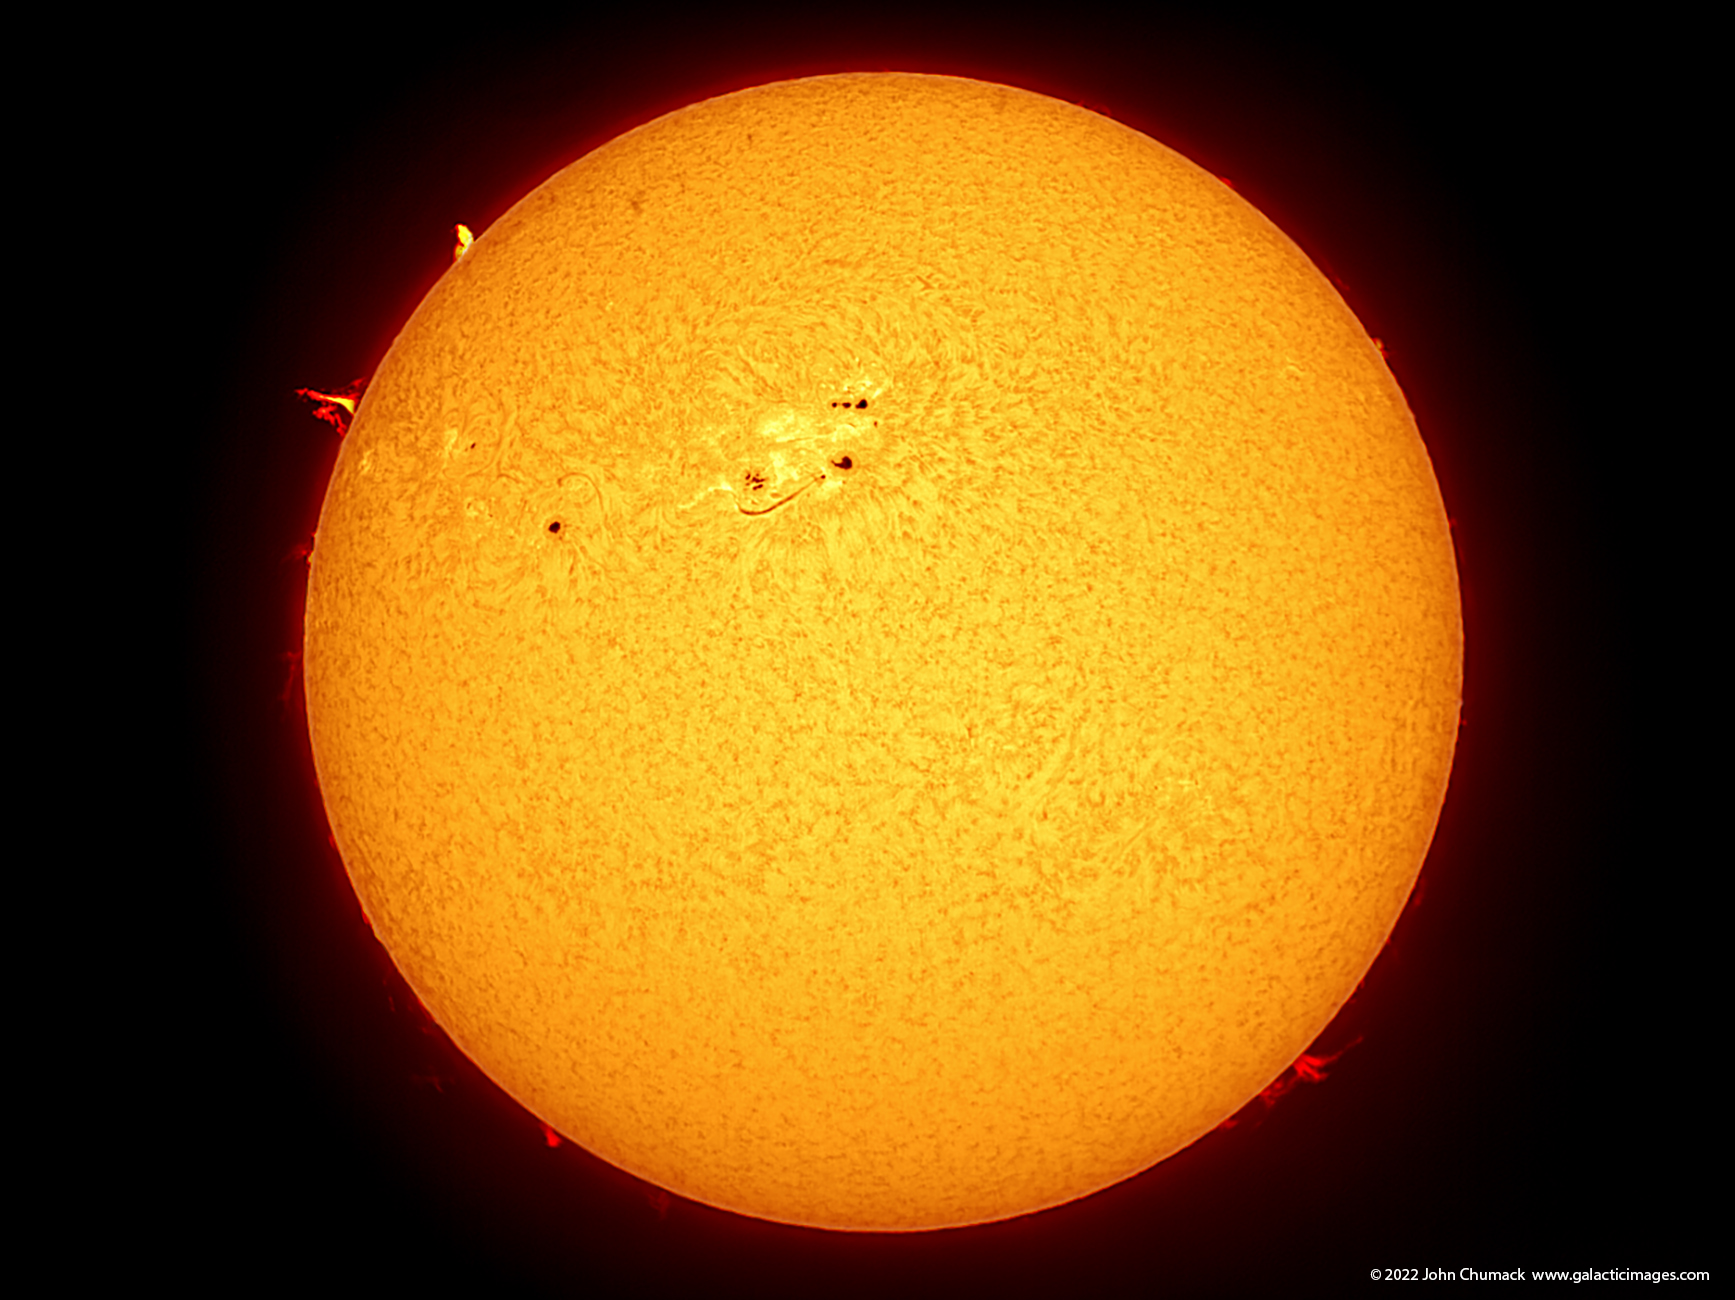 Full Disk Hydrogen Alpha Sun with Large Sunspot Groups AR2993, AR2994(right), these active regions are crackling with M class flares 04-22-2022